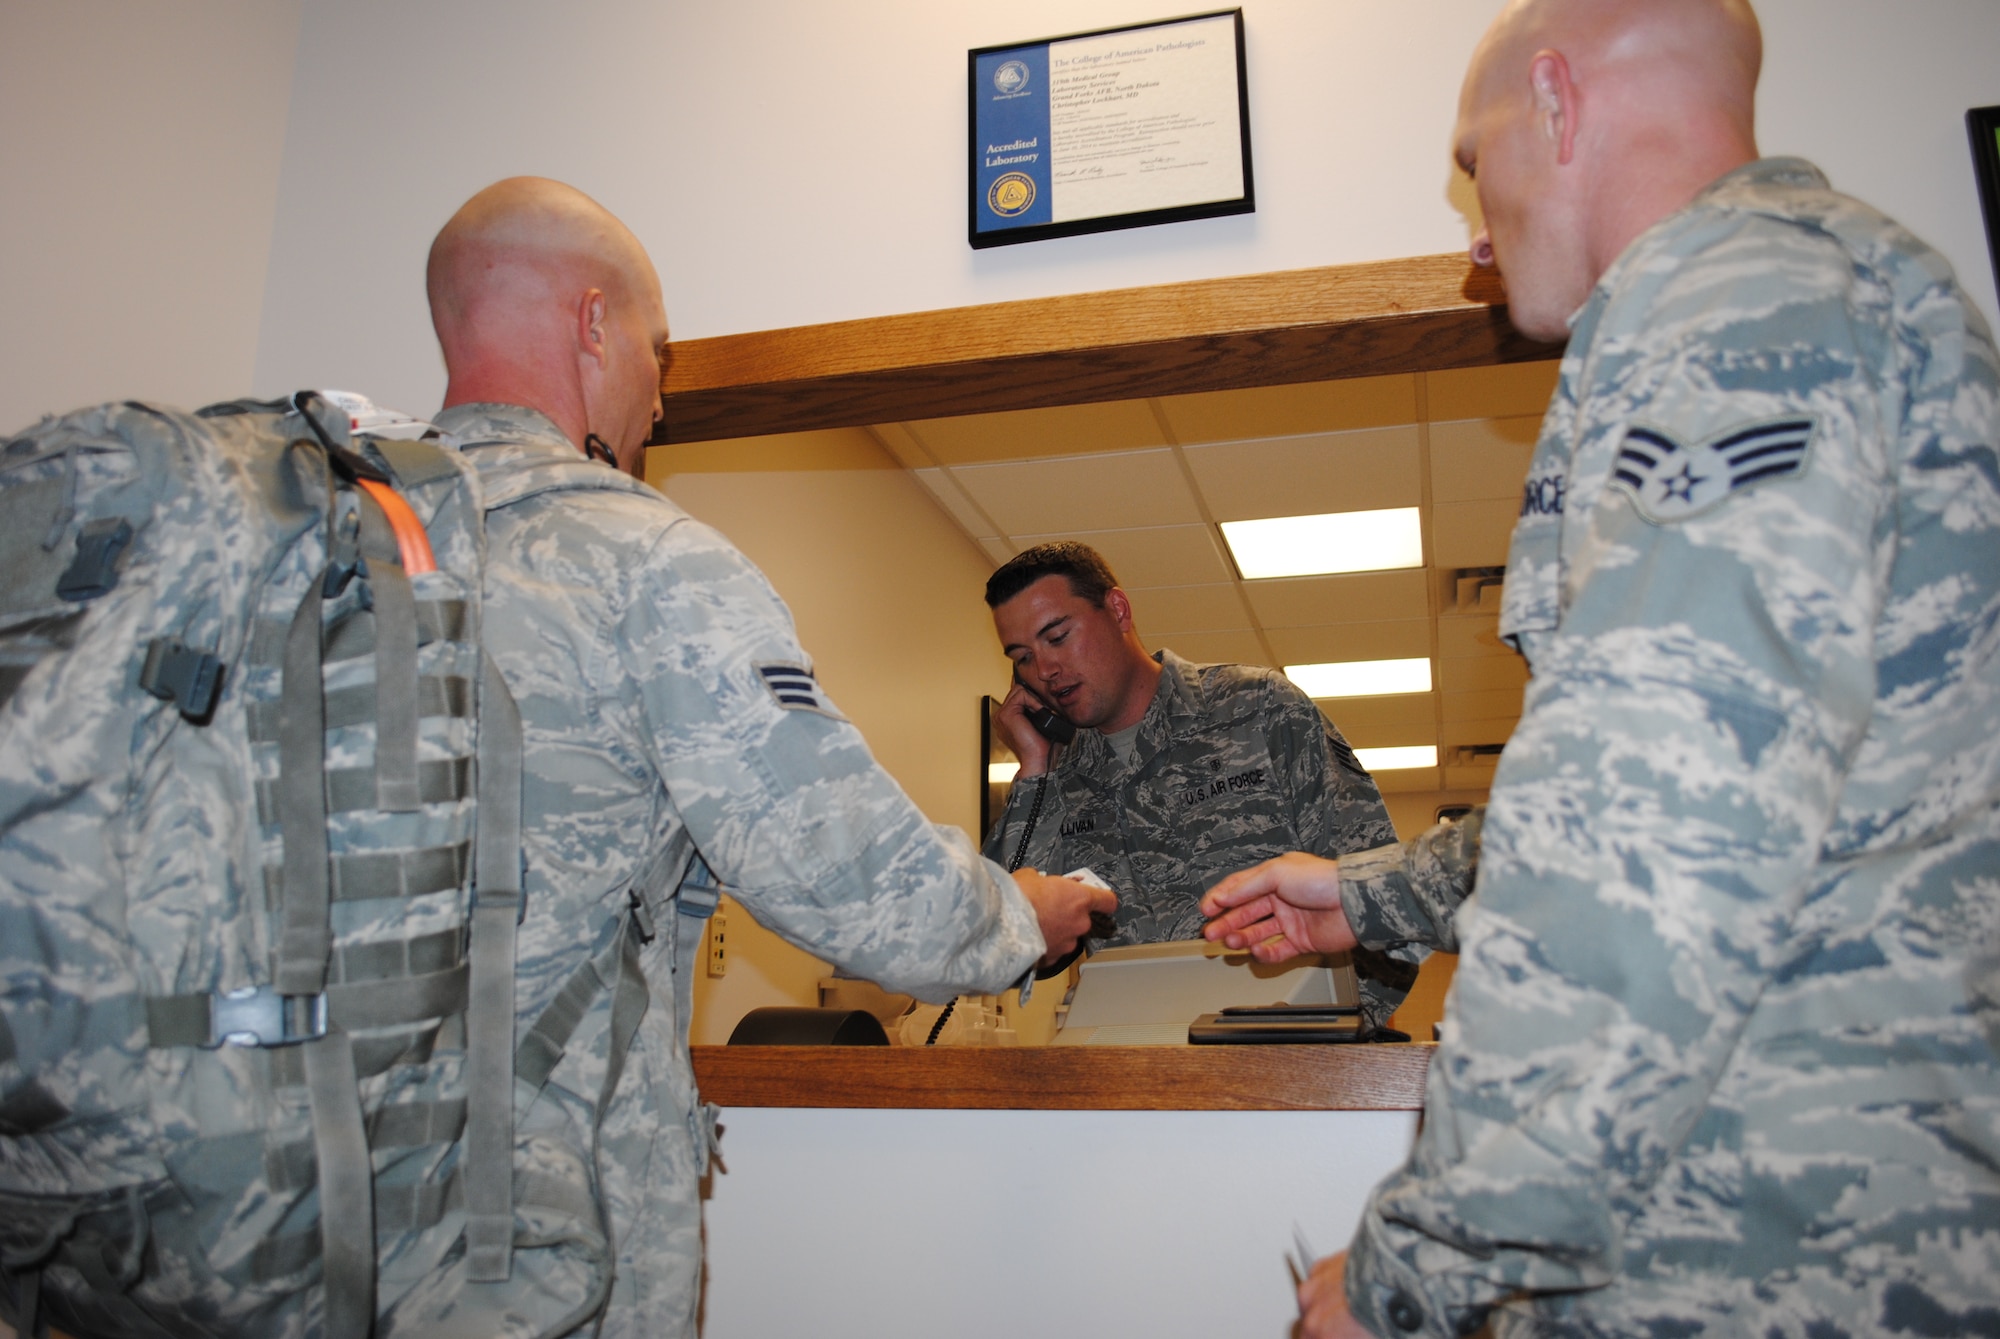 Staff Sgt. Thomas C. Sullivan Jr., 319th Medical Support Squadron laboratory technician, helps members of the 319th Security Forces Squadron in-process May 22, 2013, at the medical laboratory on Grand Forks Air Force Base, N.D. Lab patients must provide proper identification, such as a military ID before providing a medical sample. (U.S. Air Force photo/Staff Sgt. Luis Loza Gutierrez)
